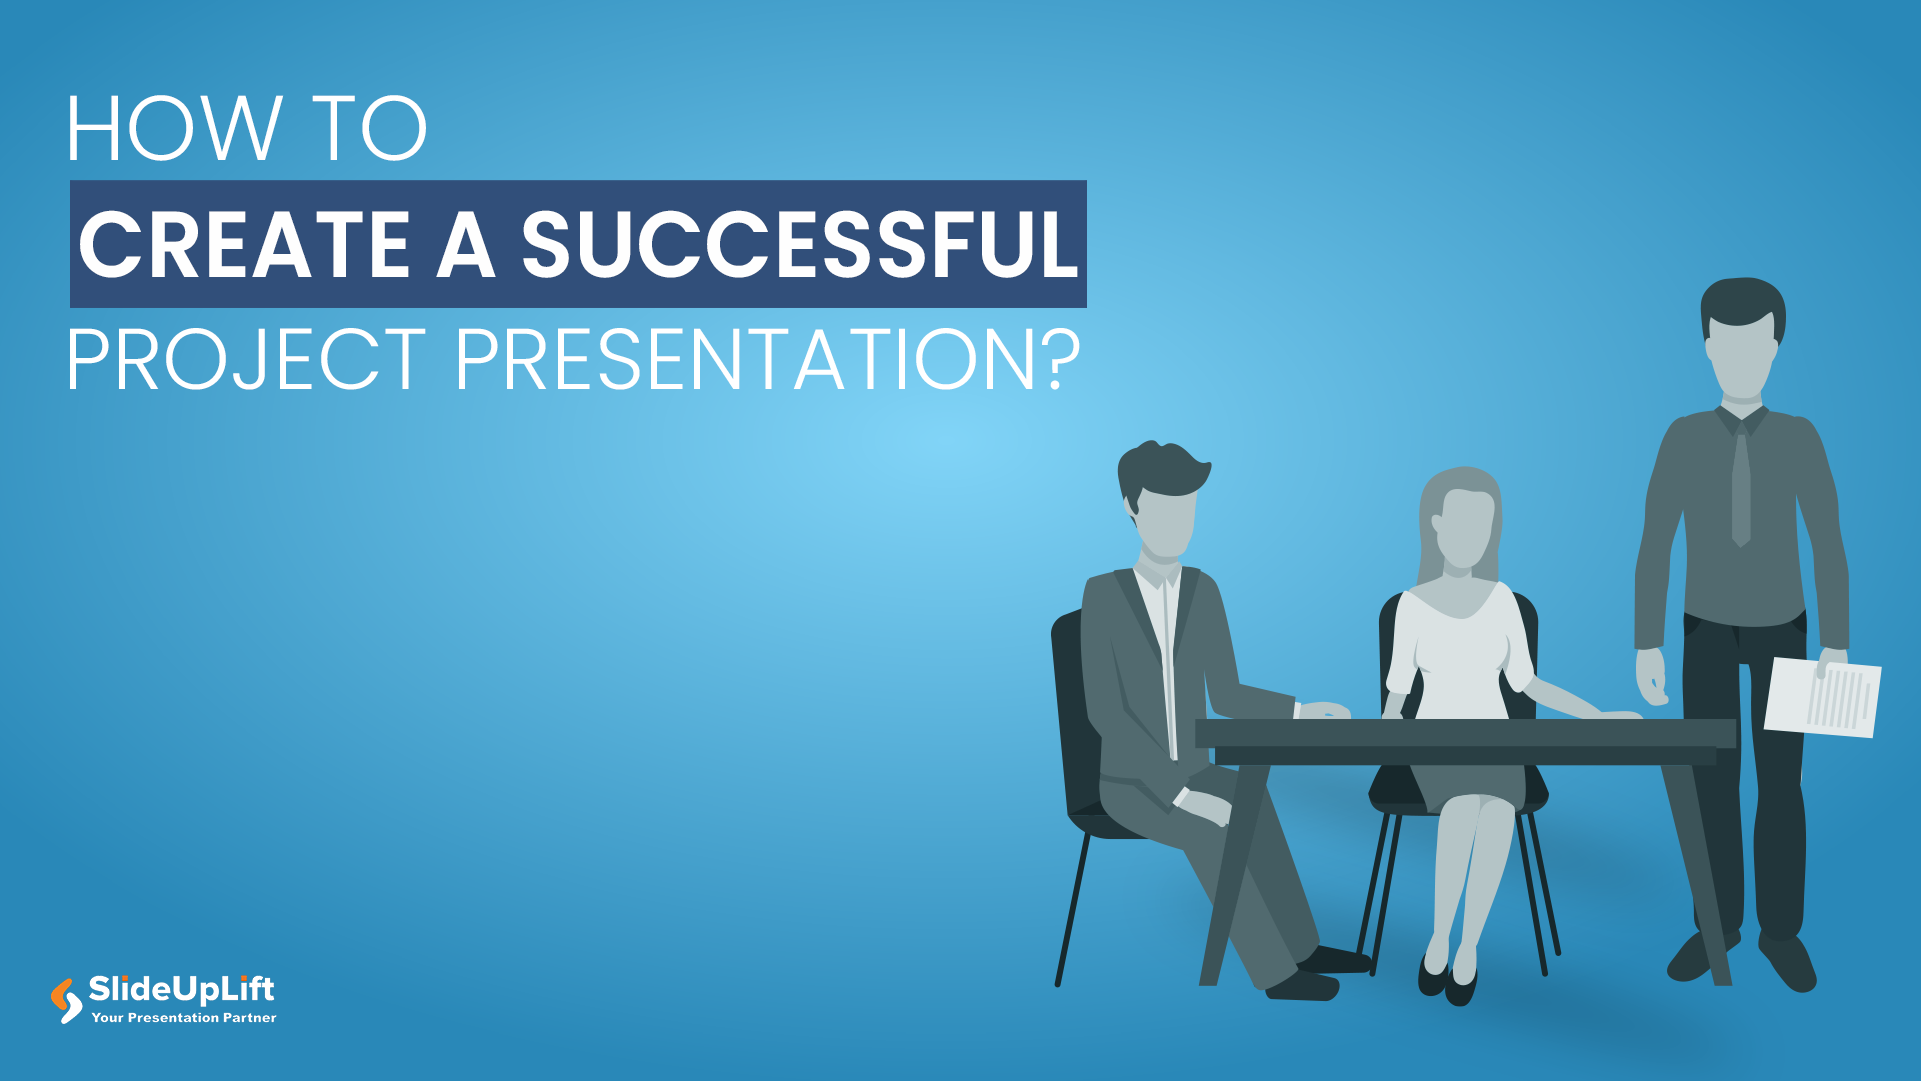 How to Create a Successful Project Presentation?